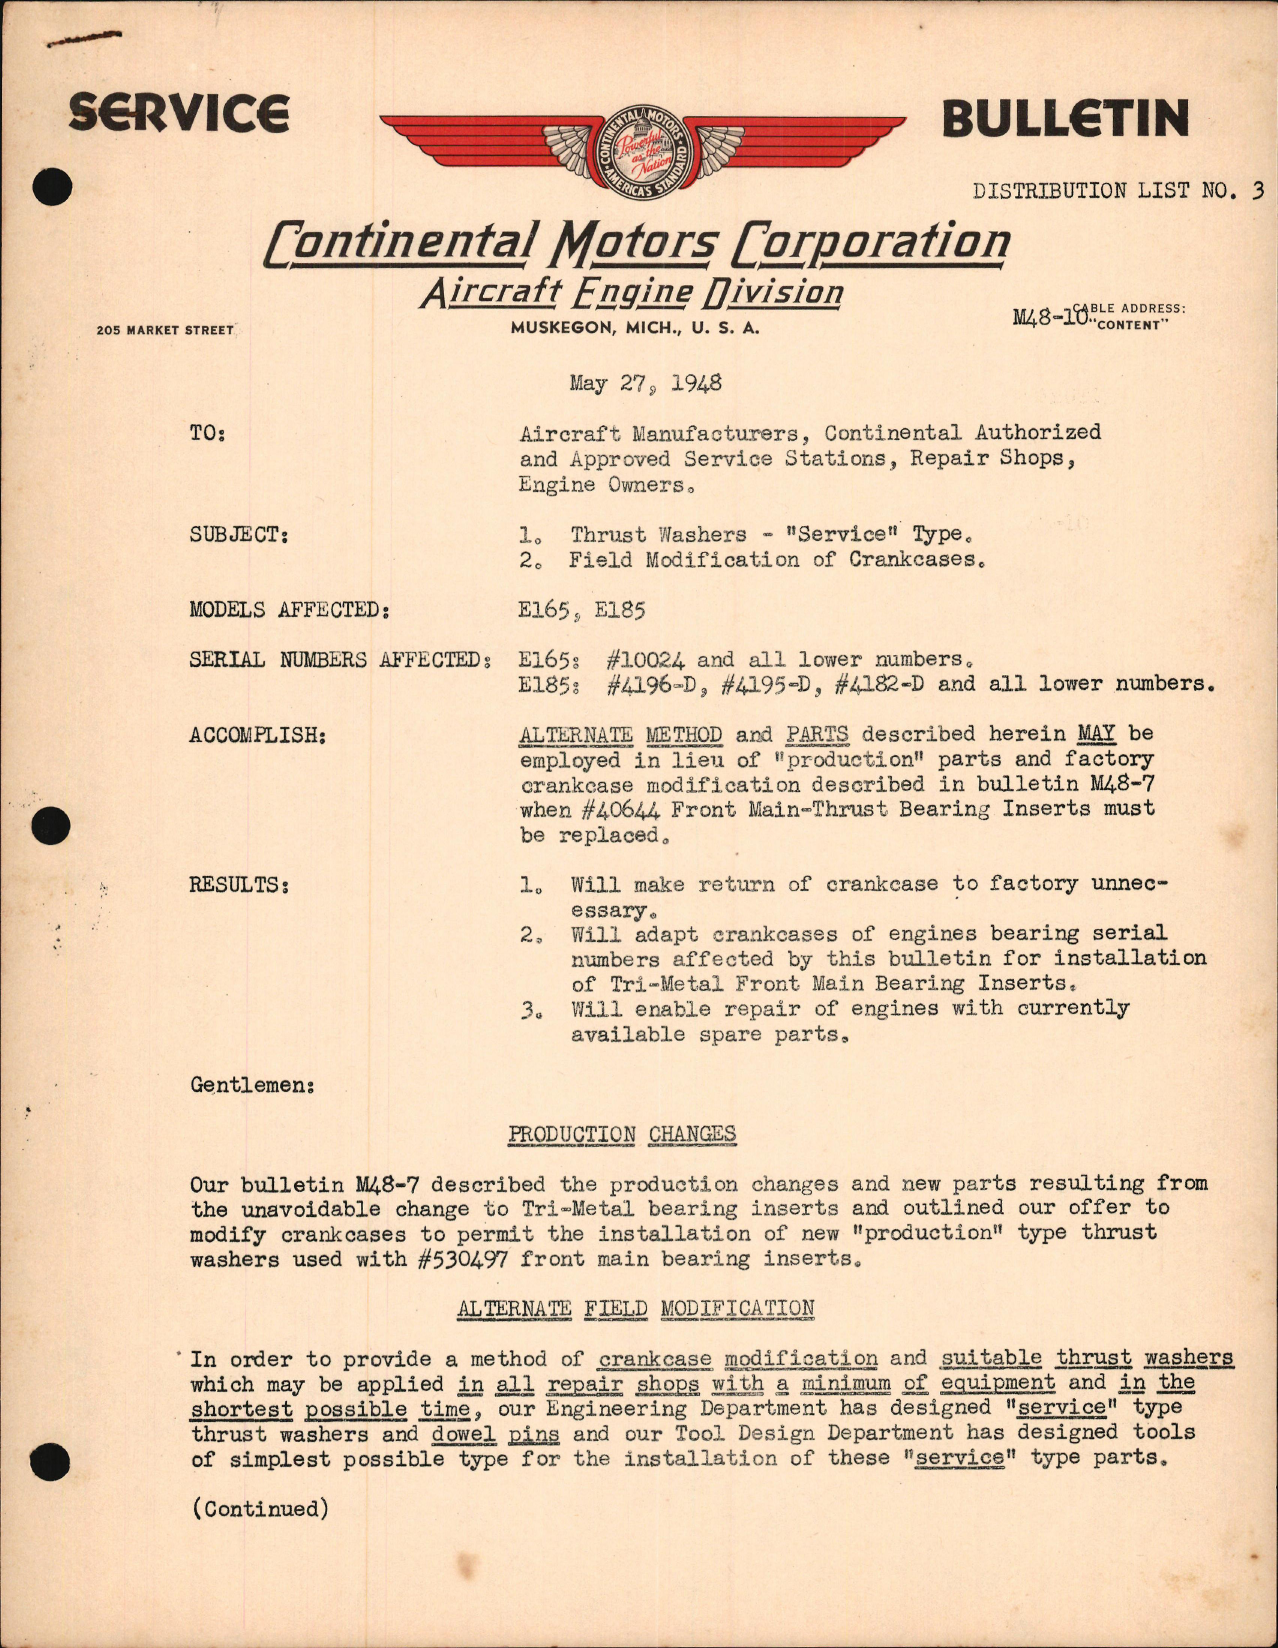 Sample page 1 from AirCorps Library document: Thrust Washers - Service Type & Field Modification of Crankcases